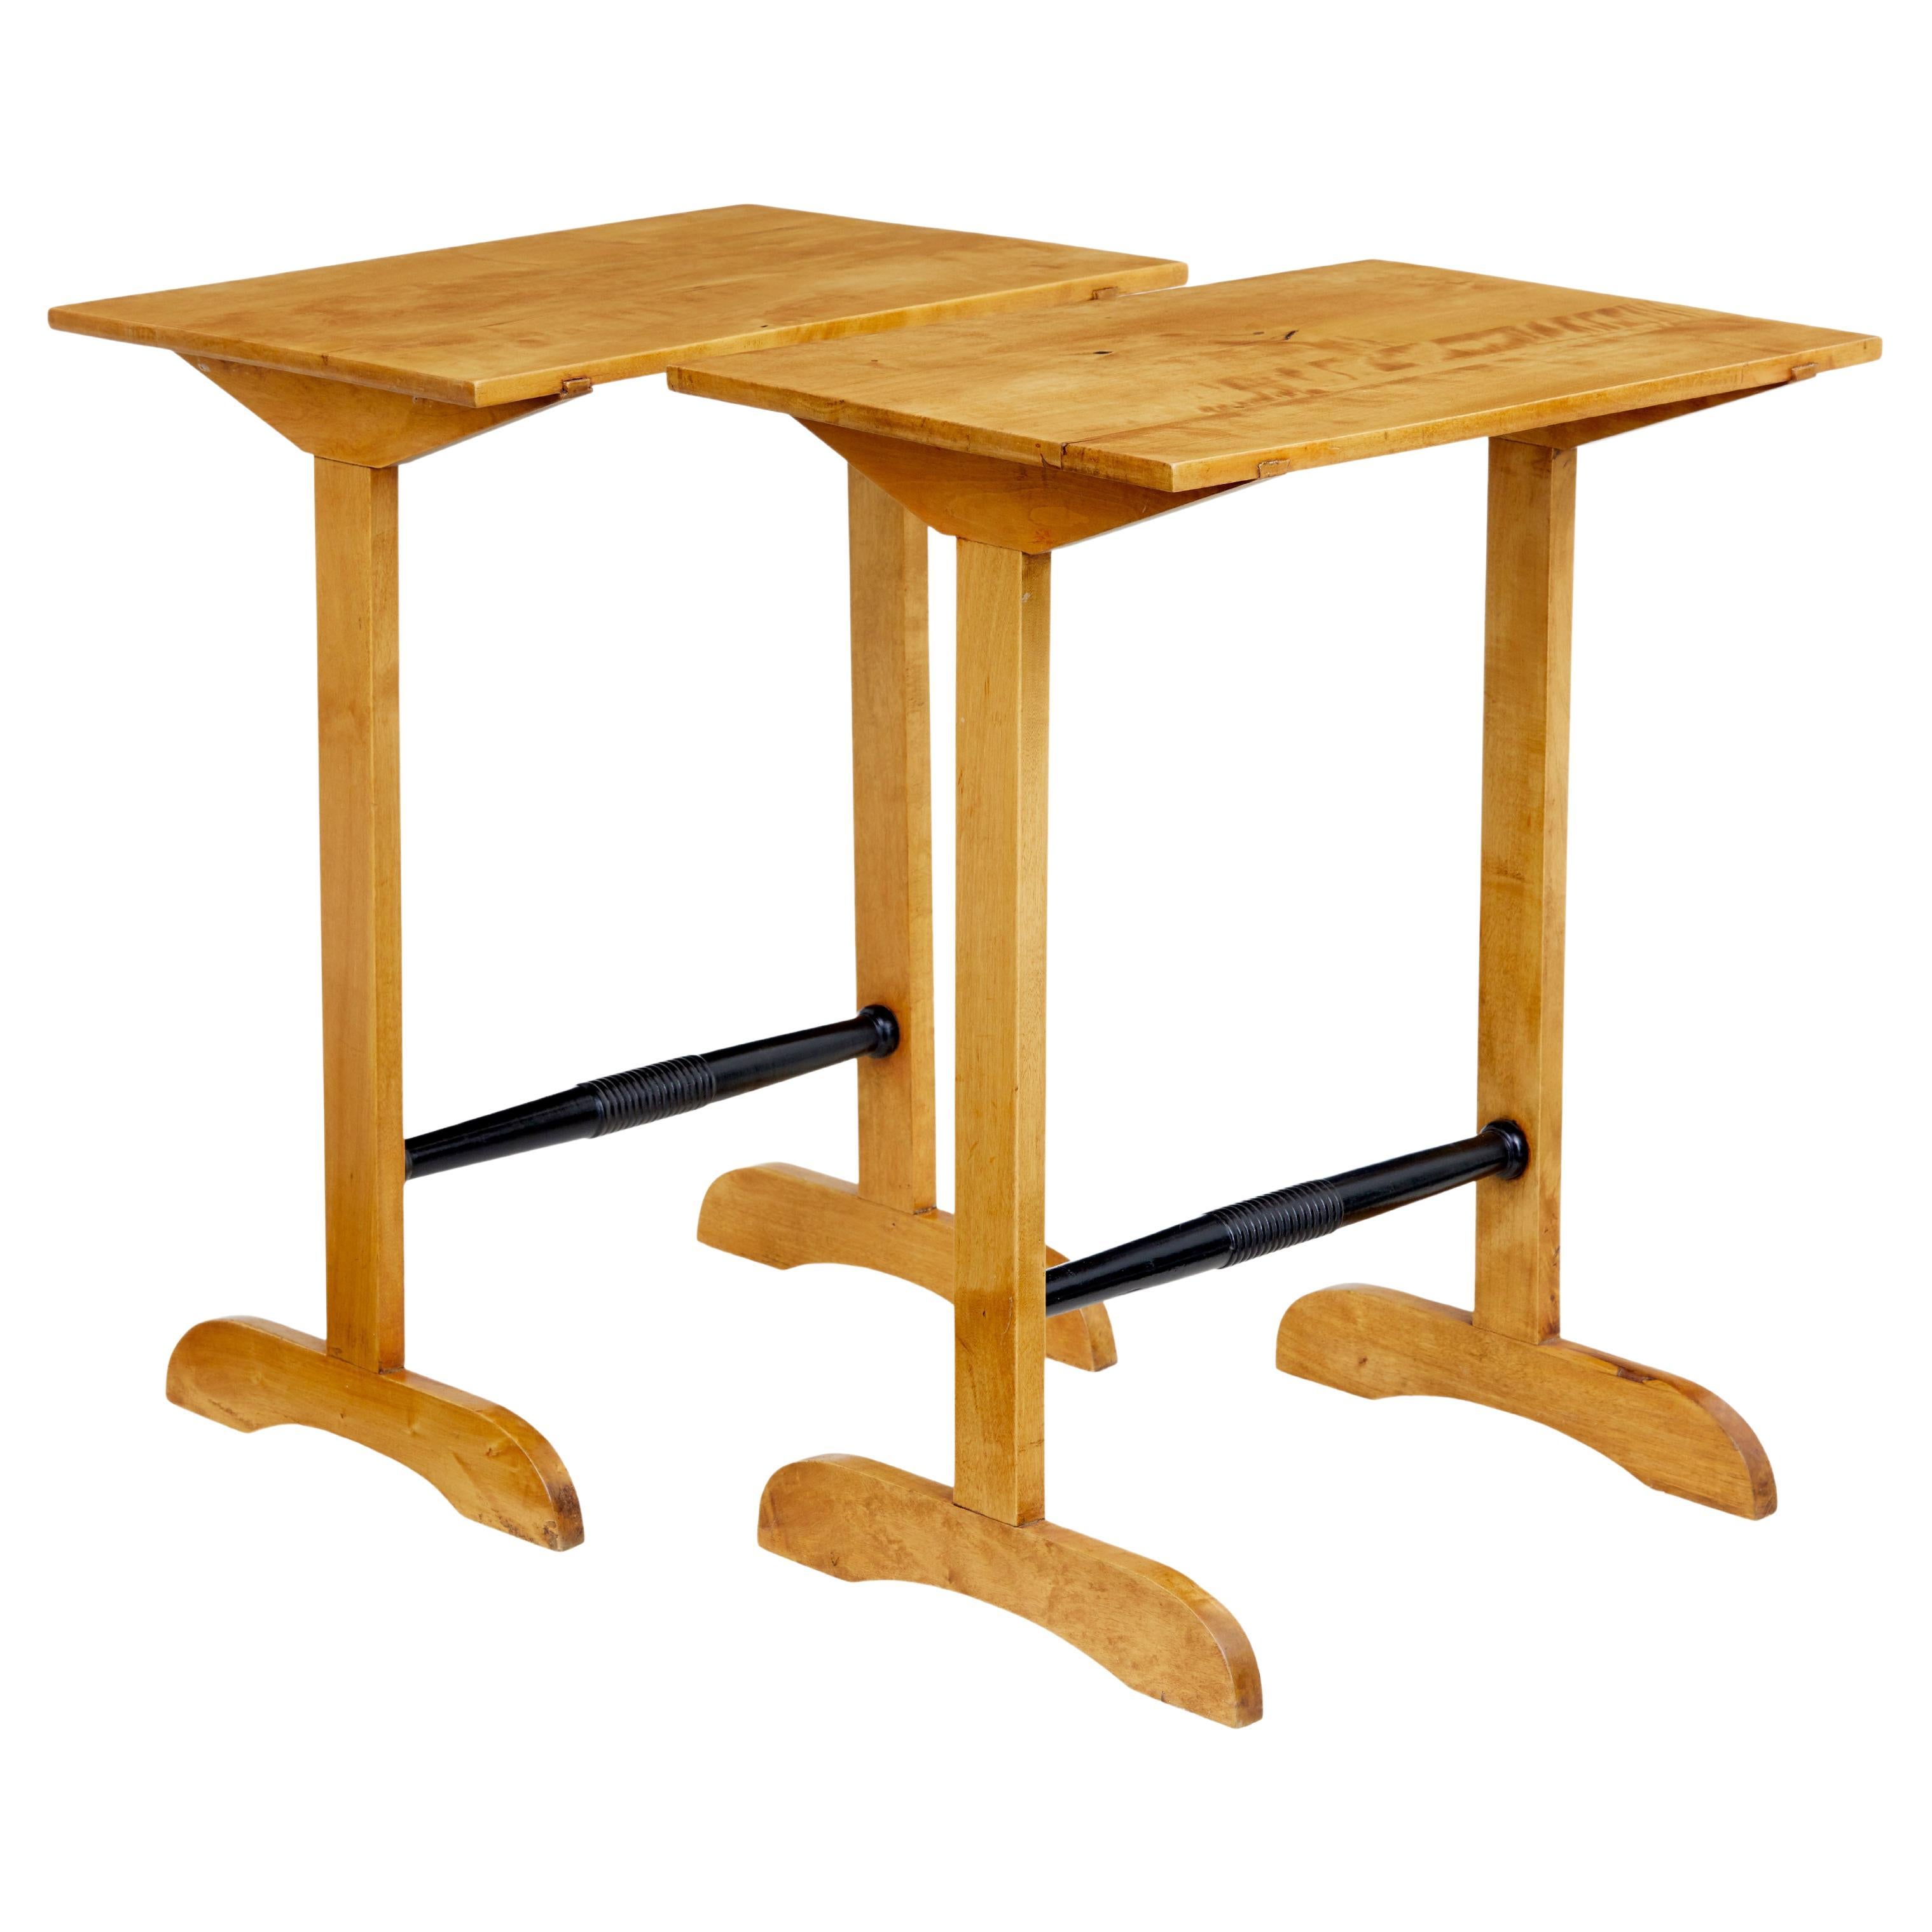 Pair of Early 20th Century Swedish Birch Side Tables